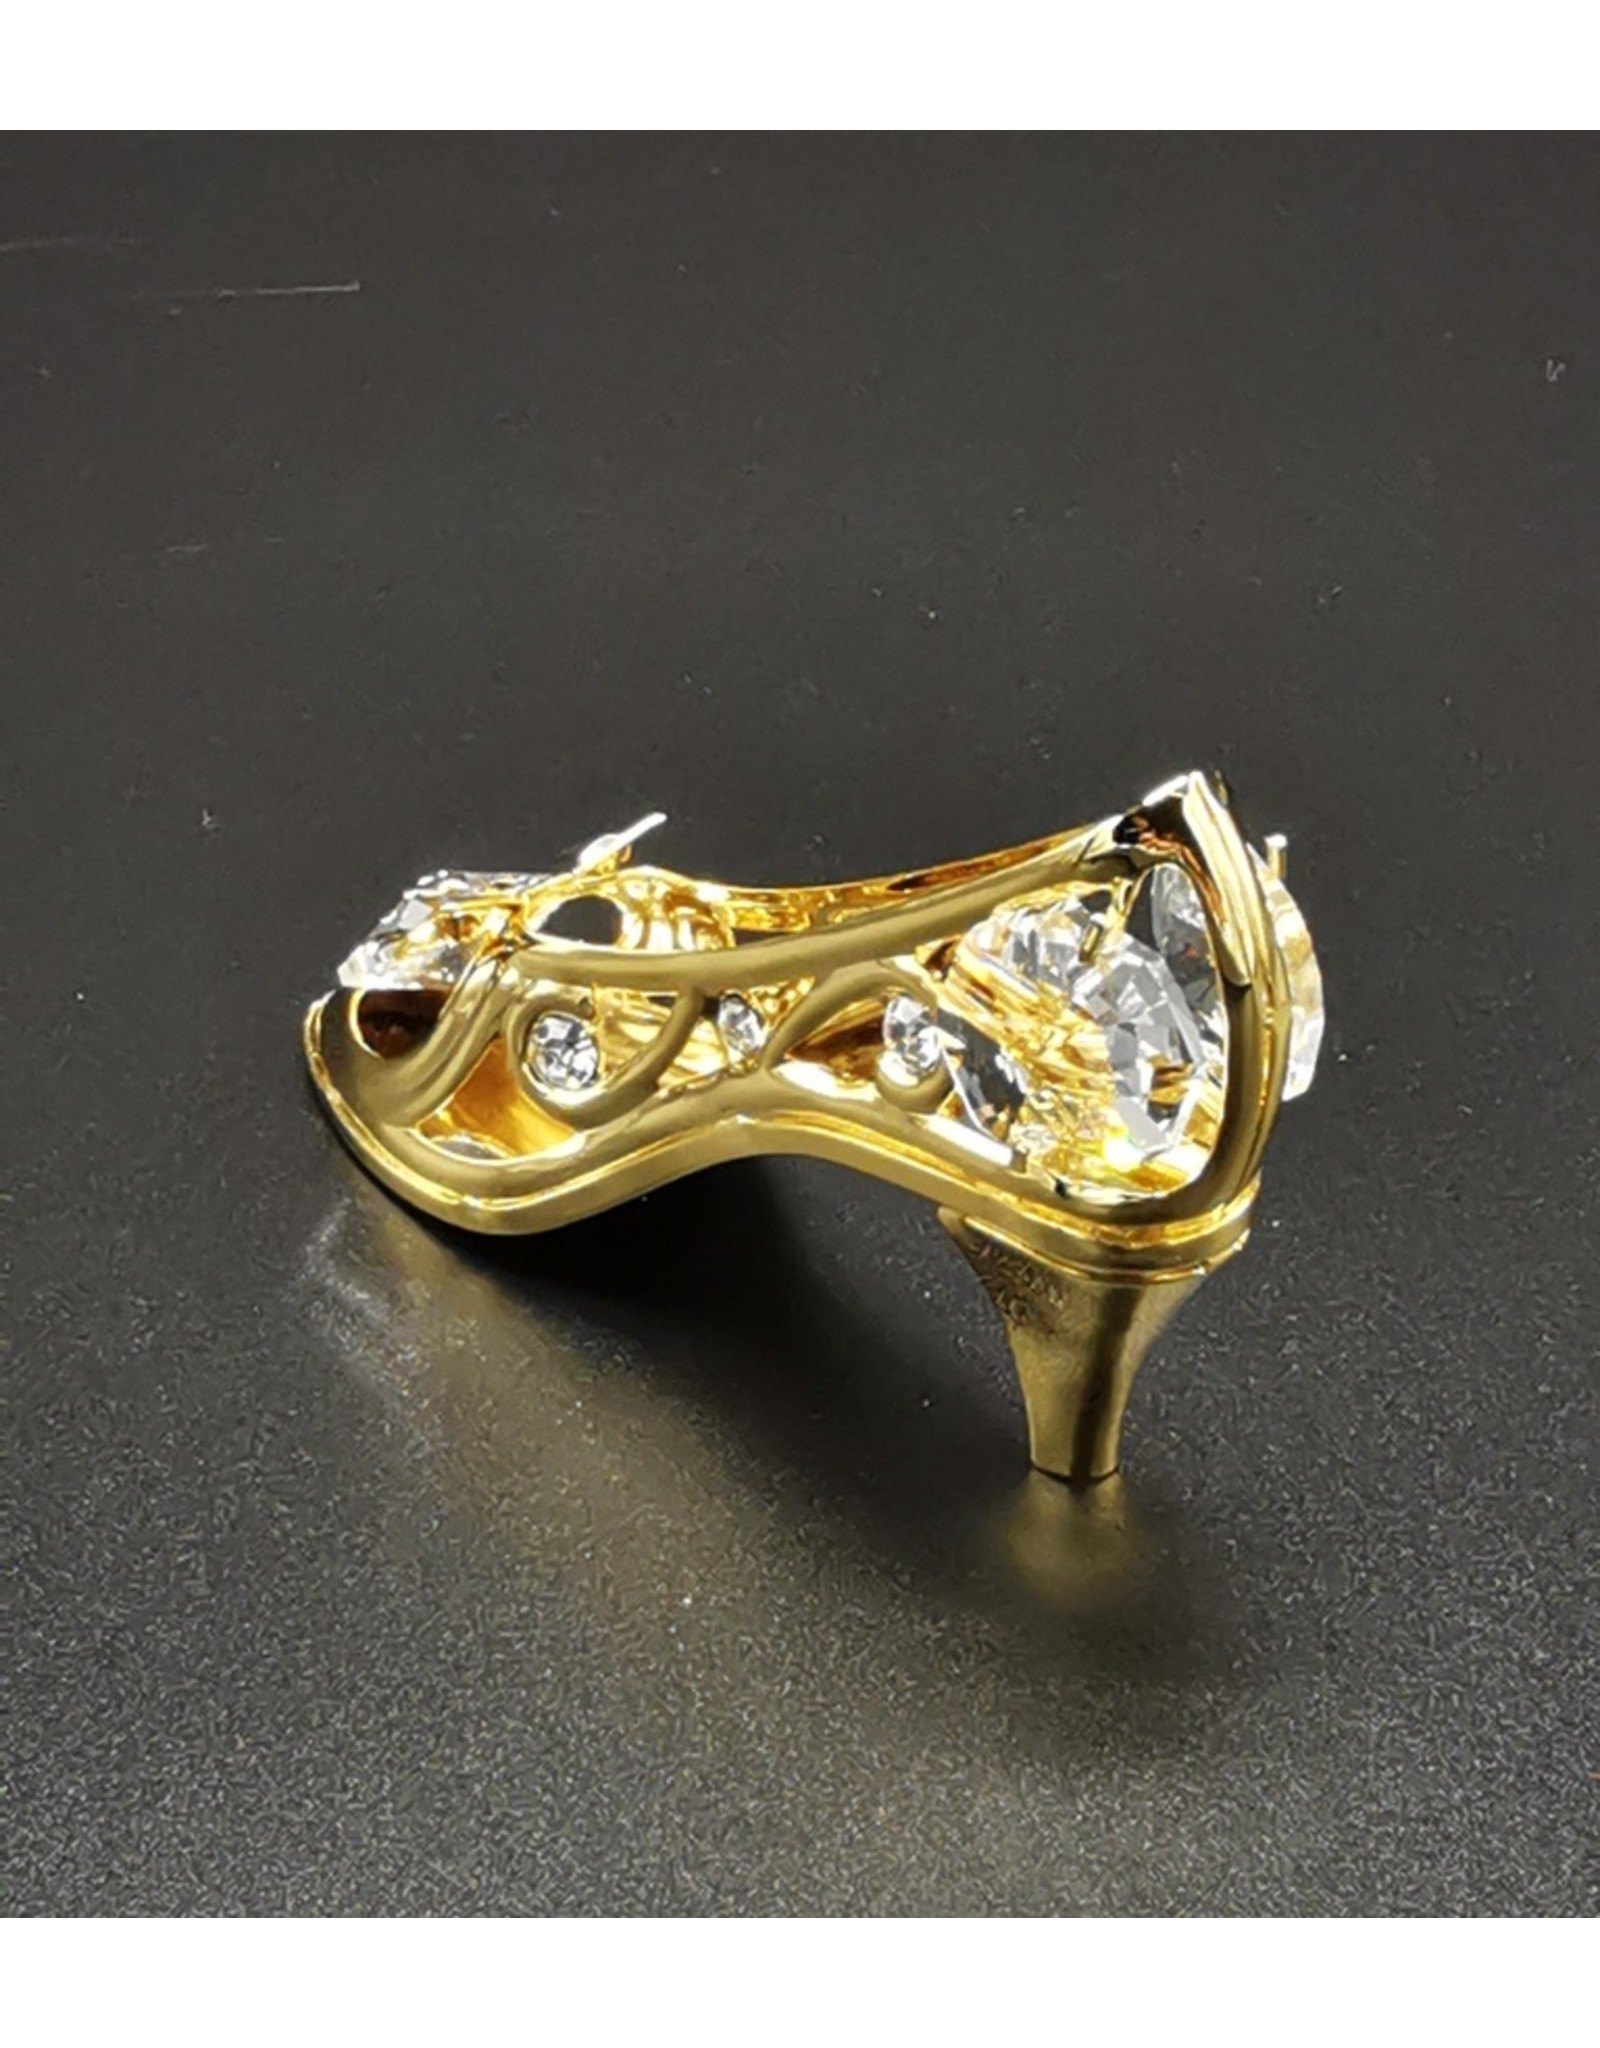 Crystal Temptations Miscellaneous - Miniature Ladies shoe. Gold-plated and with Swarovski